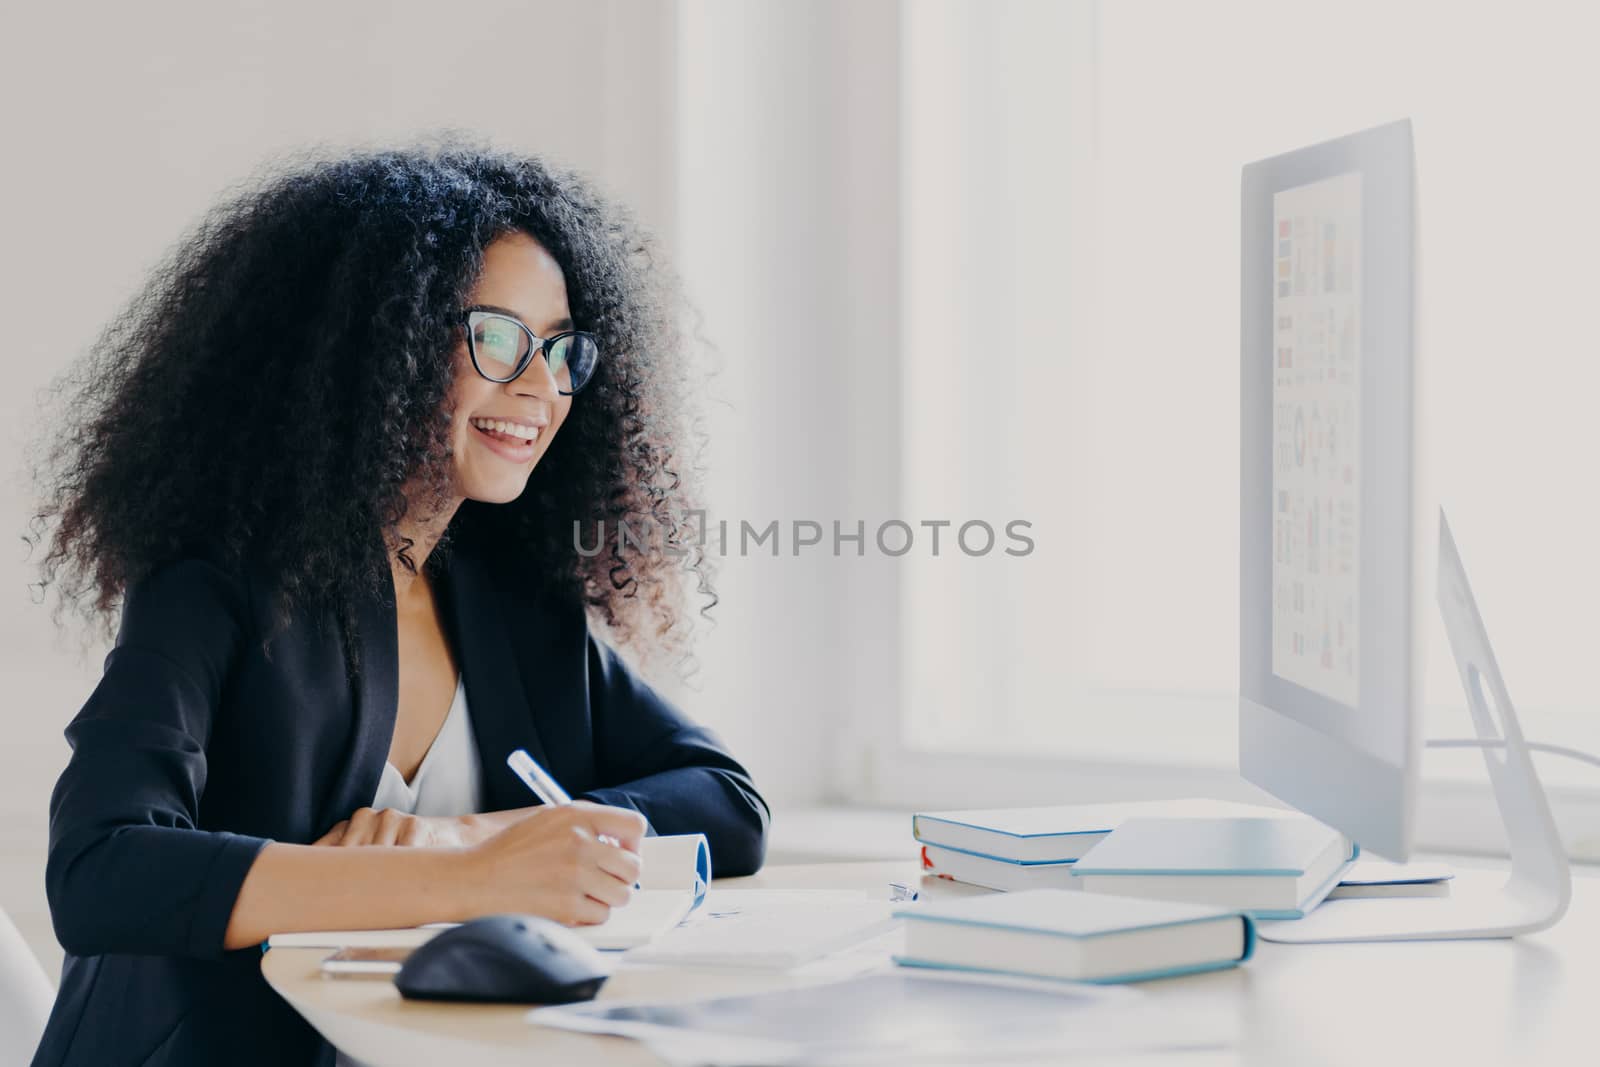 Professional curly haired woman manager makes report, focused into screen, writes down information, wears glasses and formal suit, notes idea for strartup planning, poses in office interior.